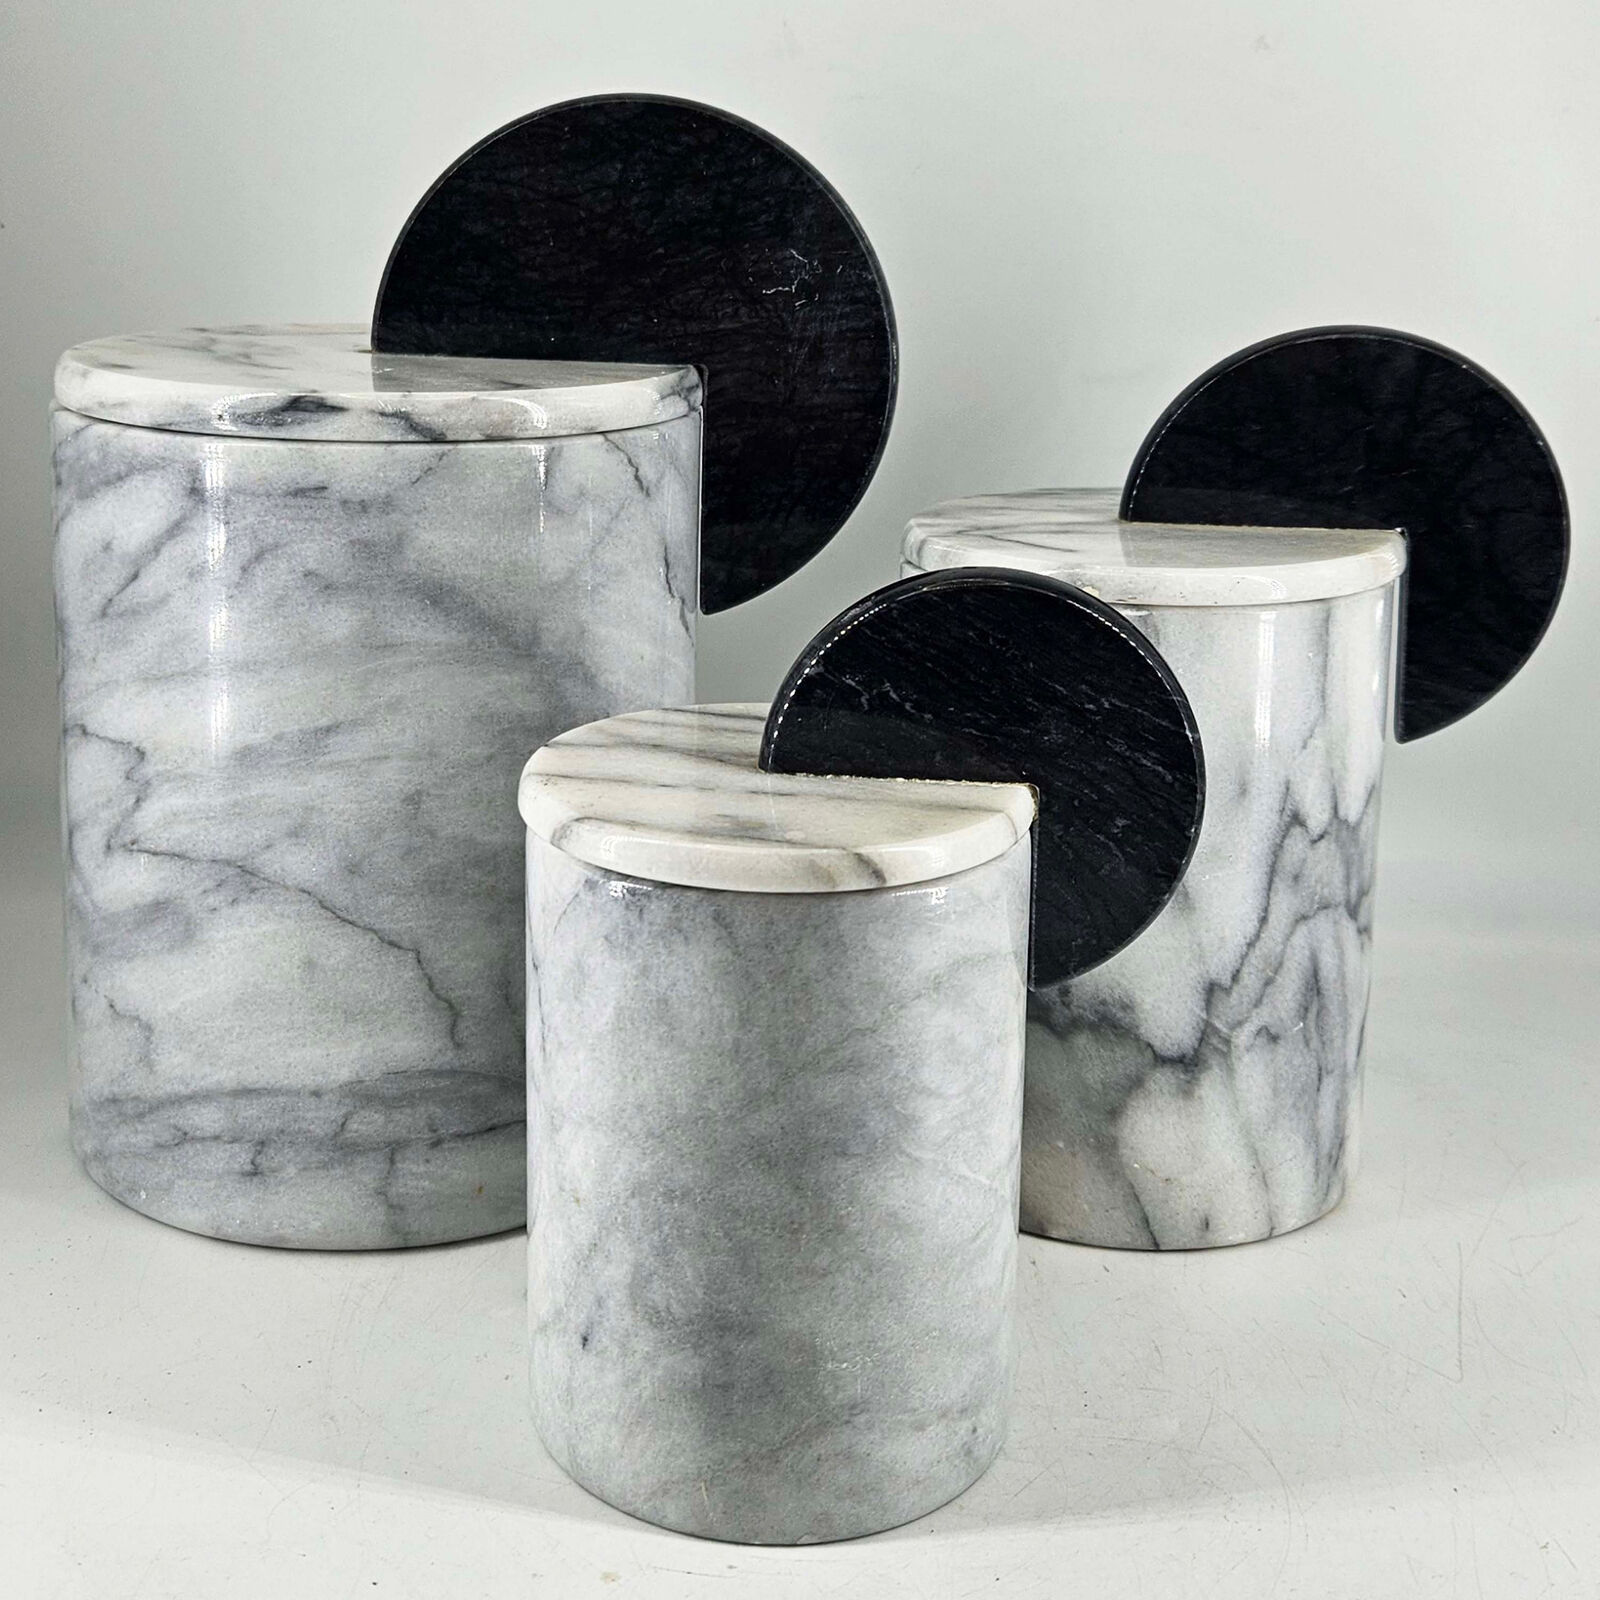 Set of 3 Rare Vintage Italian Art Deco style heavy Marble Canisters with lids